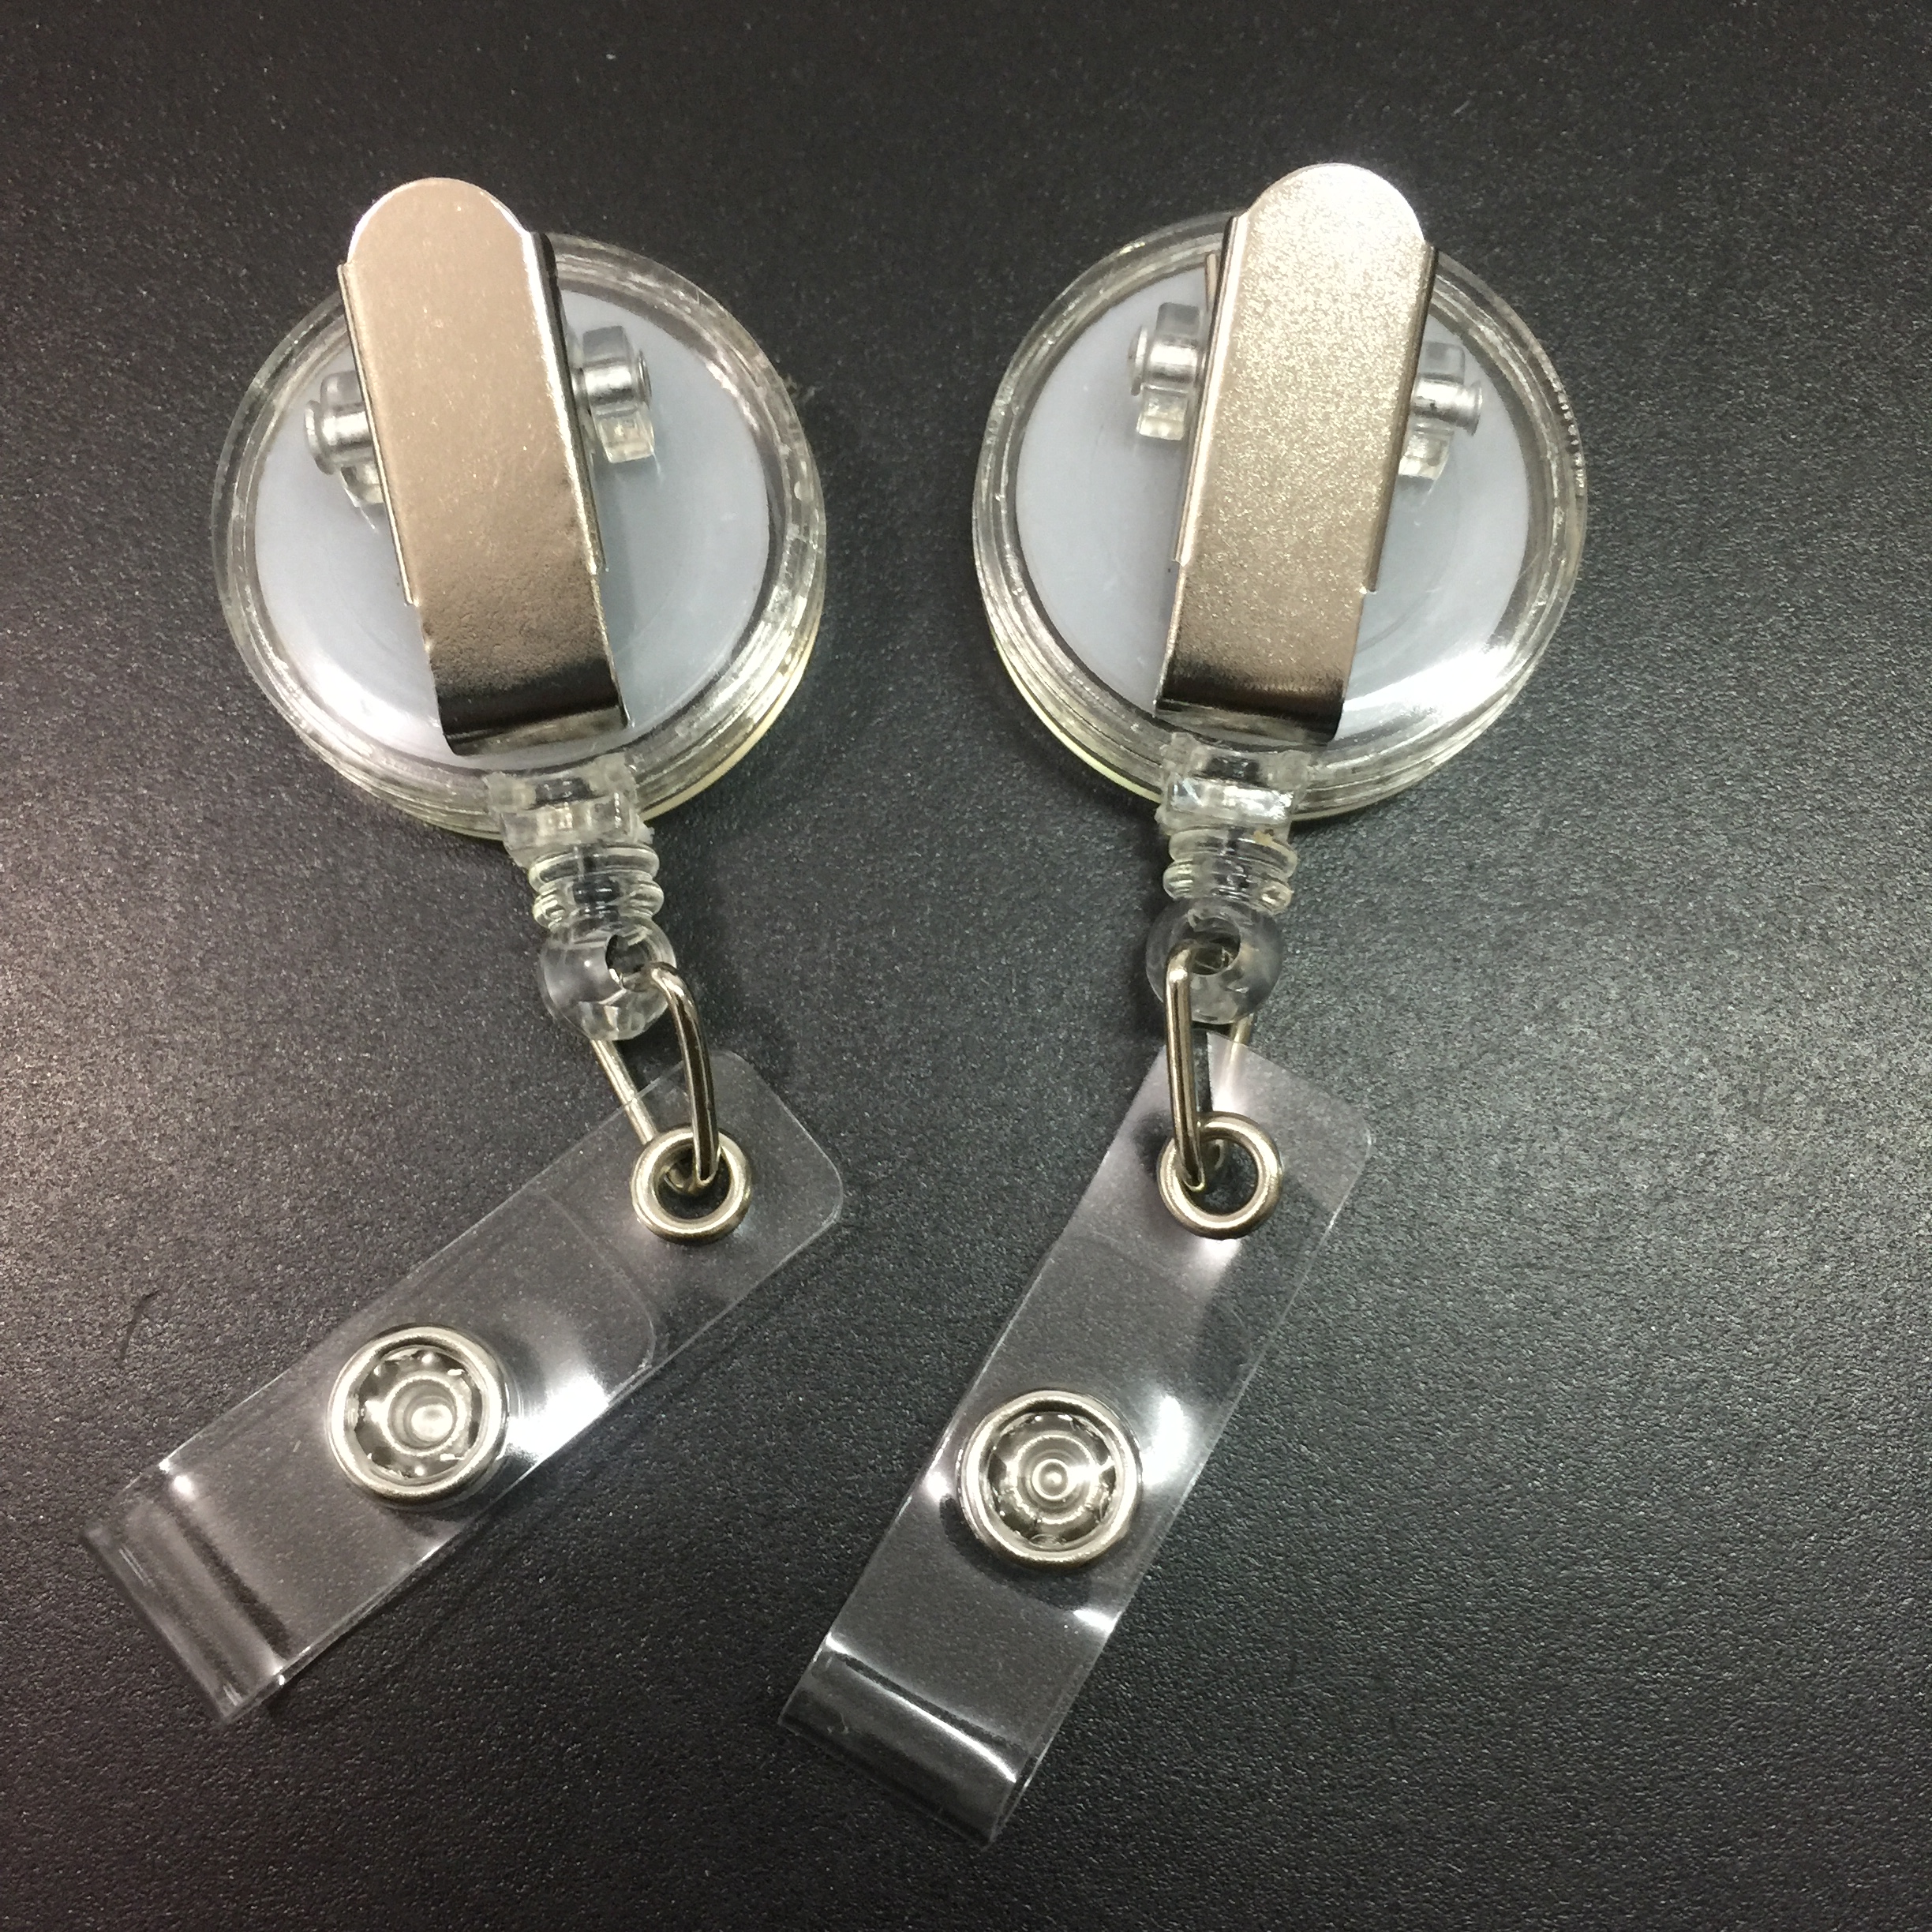 32MM Round ABS Retractable badge holder with fixed clip